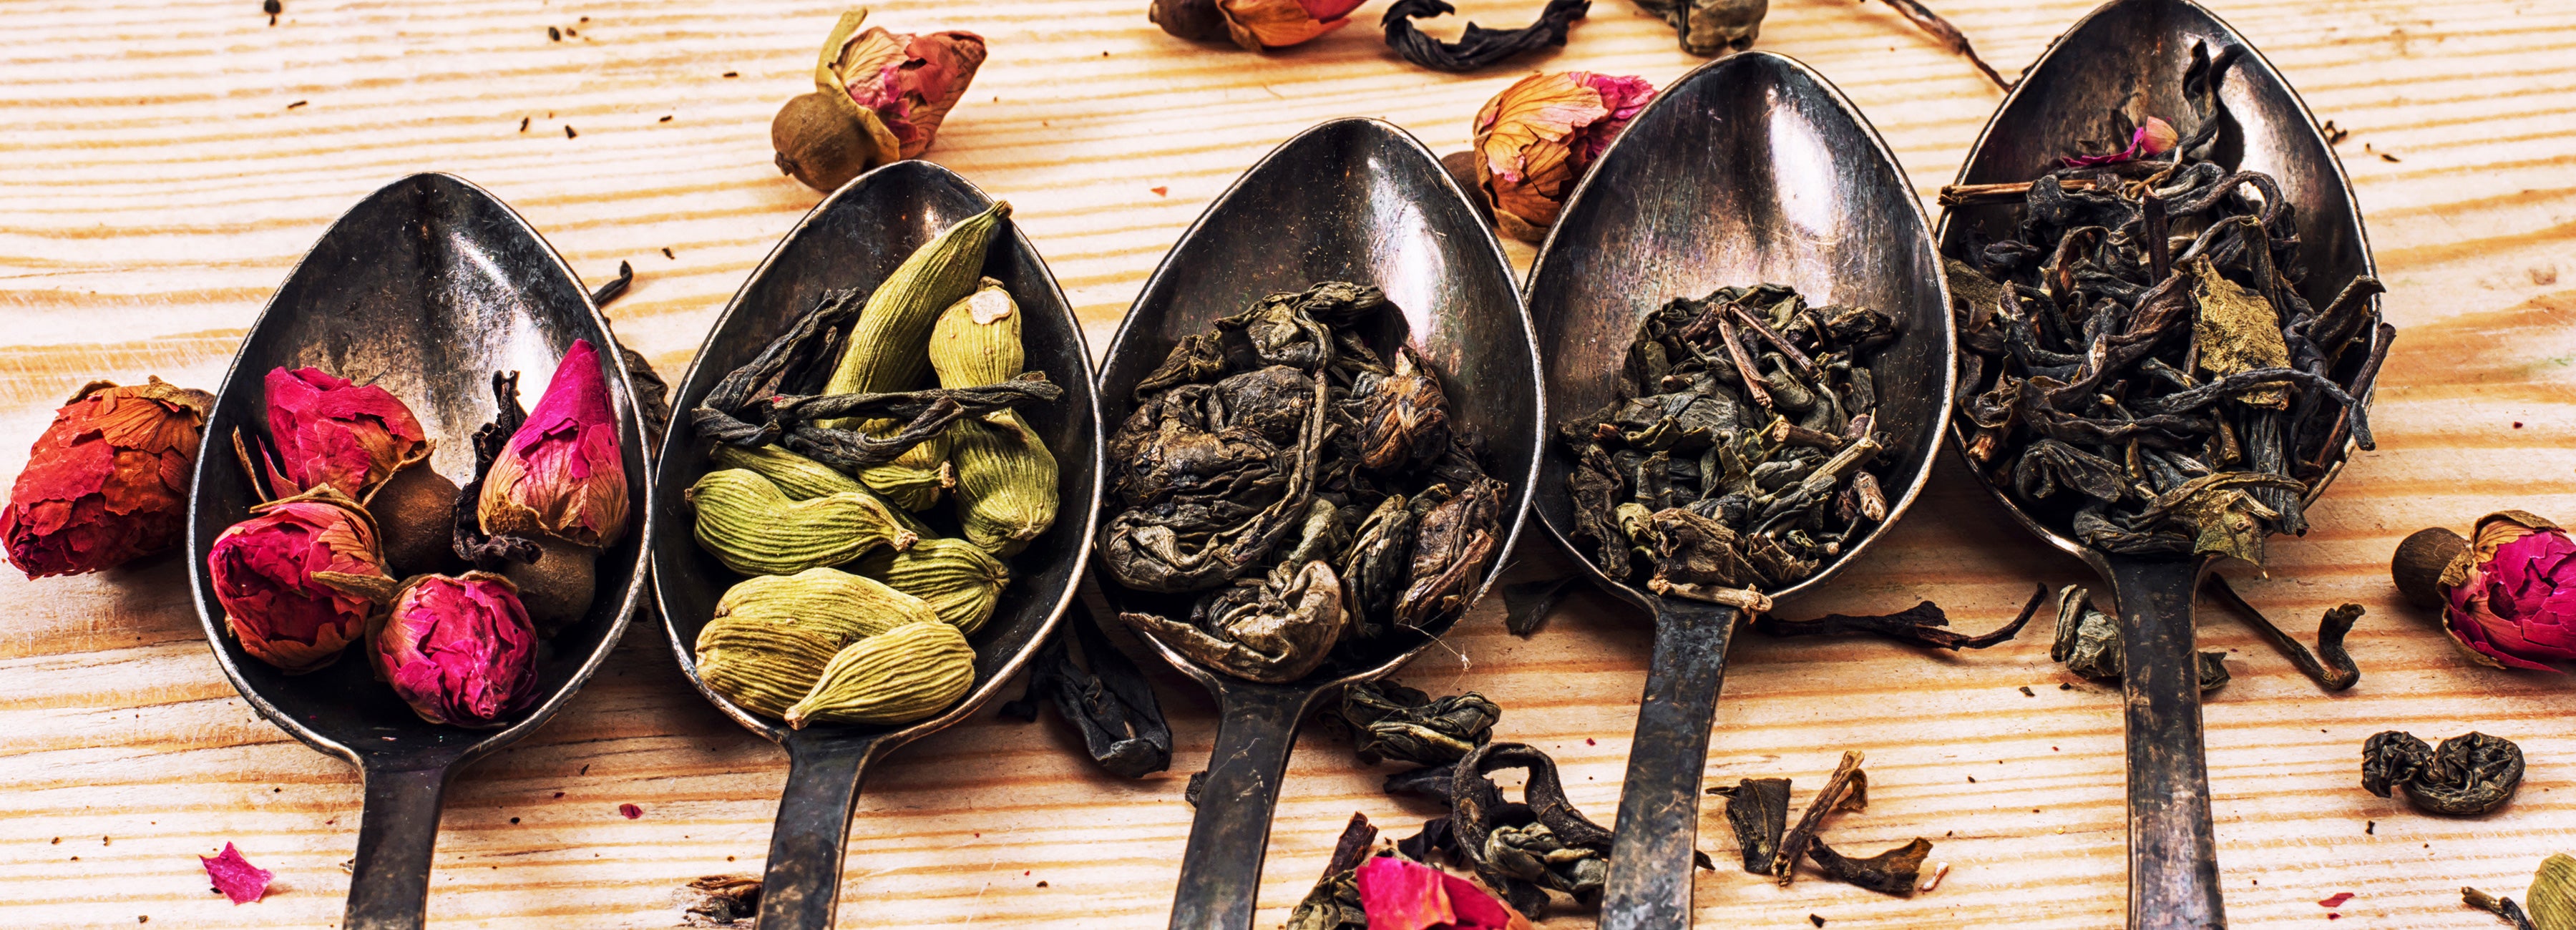 How To Get Started With Loose Leaf Tea 